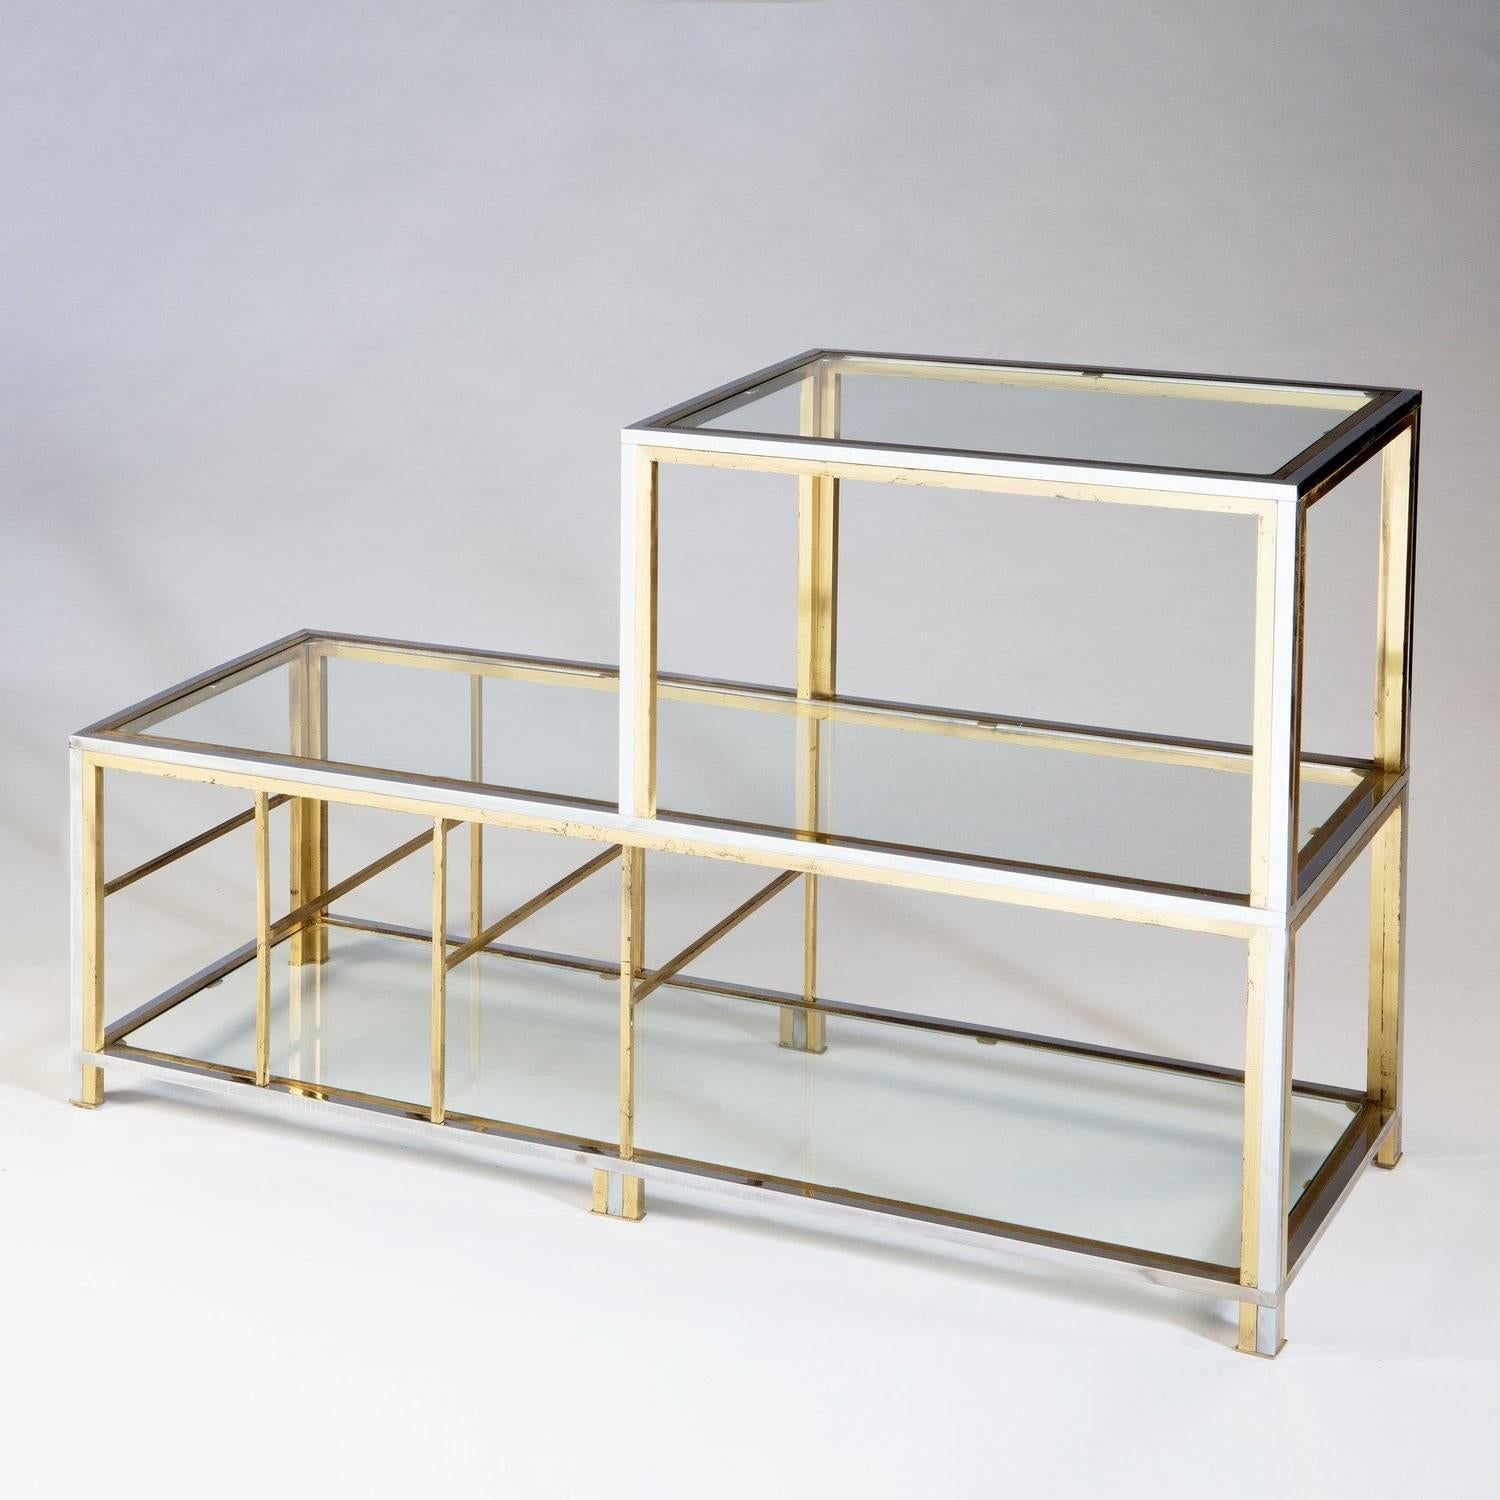 A chrome and brass three tiered stepped etagere. Each tier constructed as bands of the two metals, each element made with fine detail and crispness.
retaining its original lacquer.

In the manner of Romeo Rega.

Italy, circa 1975

Measures: